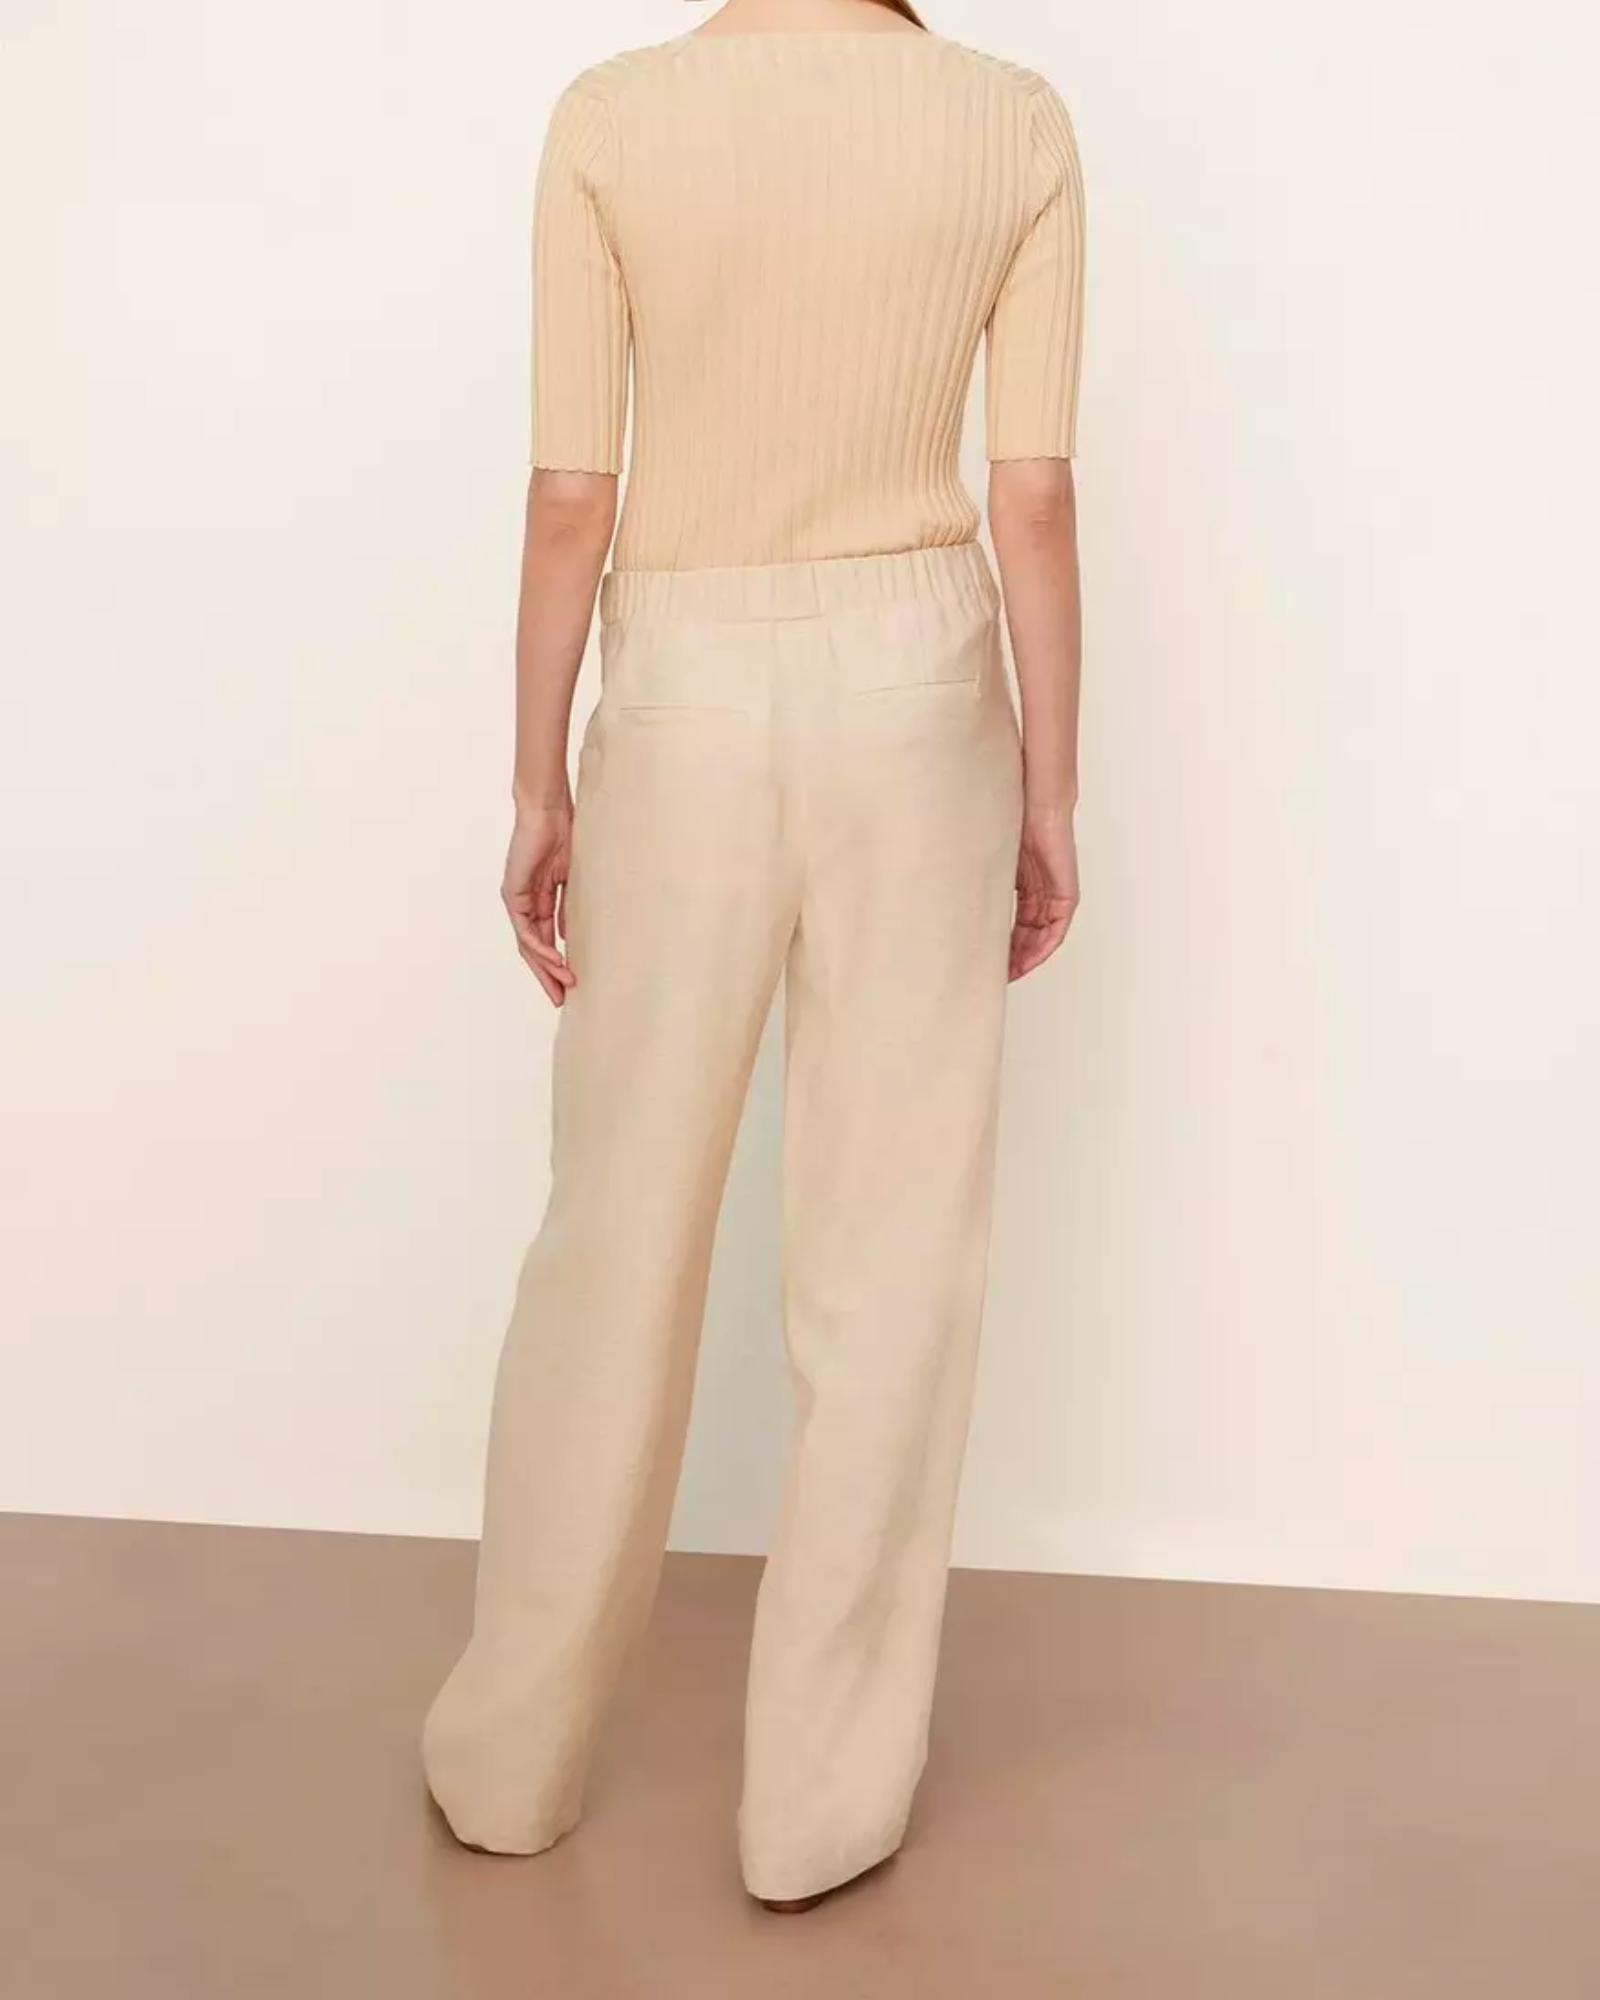 Vince Straight Leg Pull On Pant in Pale Sand